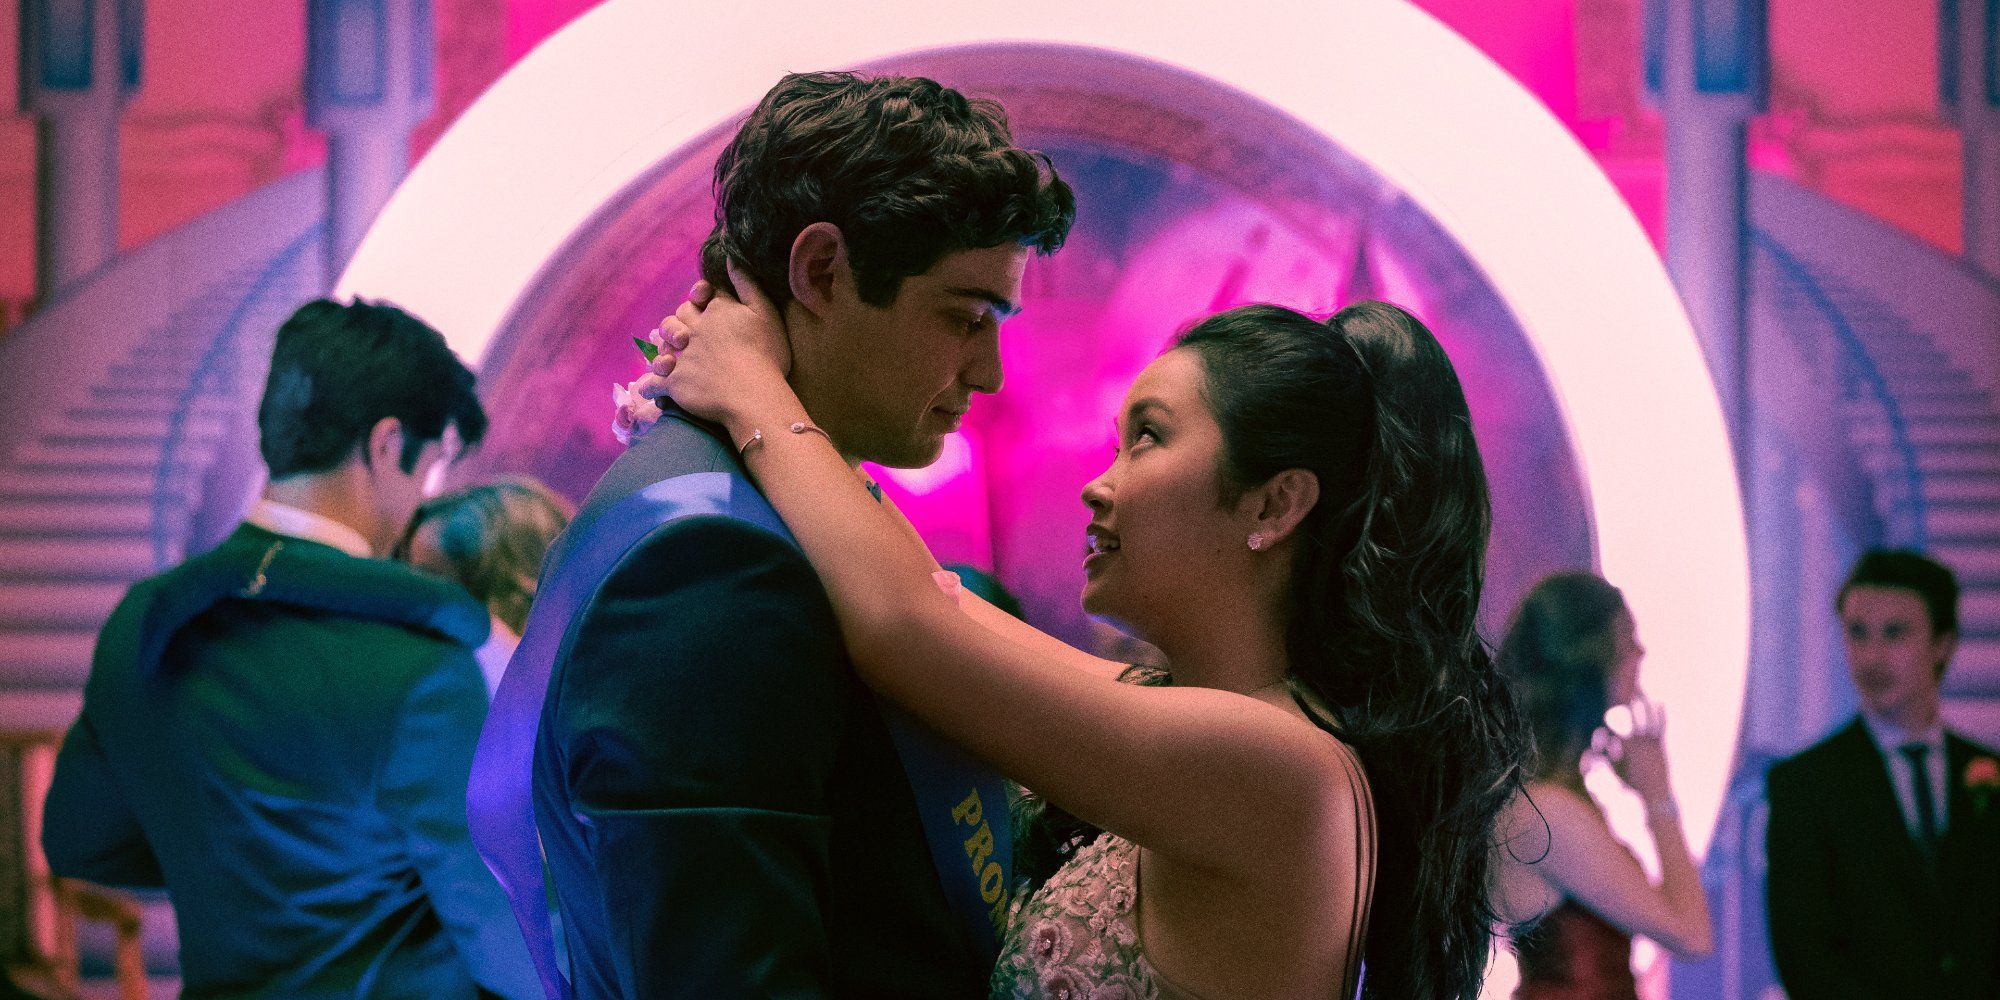 Noah Centineo and Lana Condor in To All the Boys Always and Forever